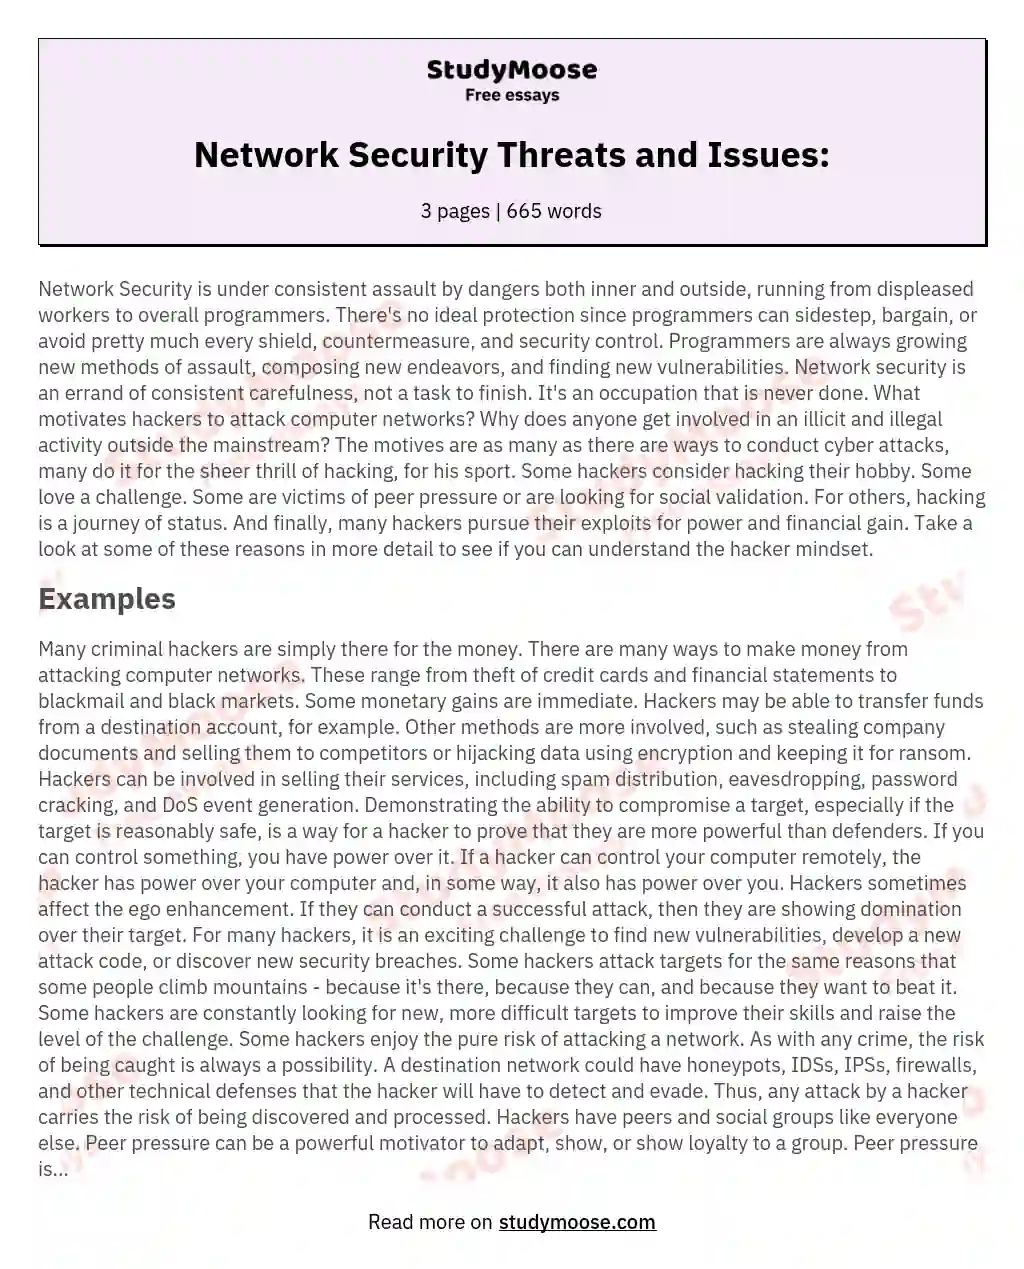 Network Security Threats and Issues: